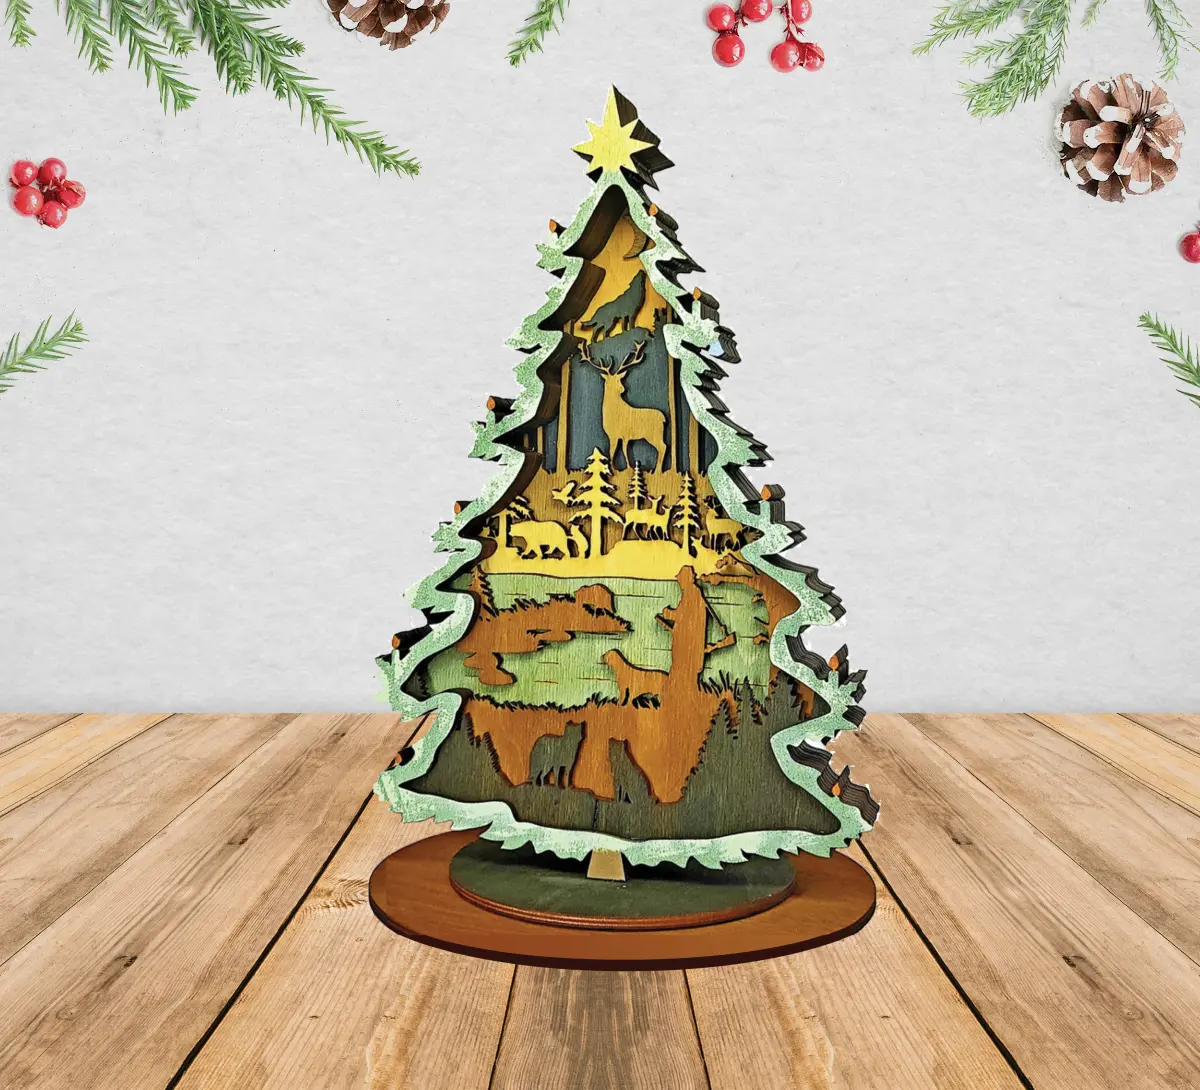 Engraved Christmas Trees Wood 2-D Mantle Pieces Home Decor Angel Tree Designs